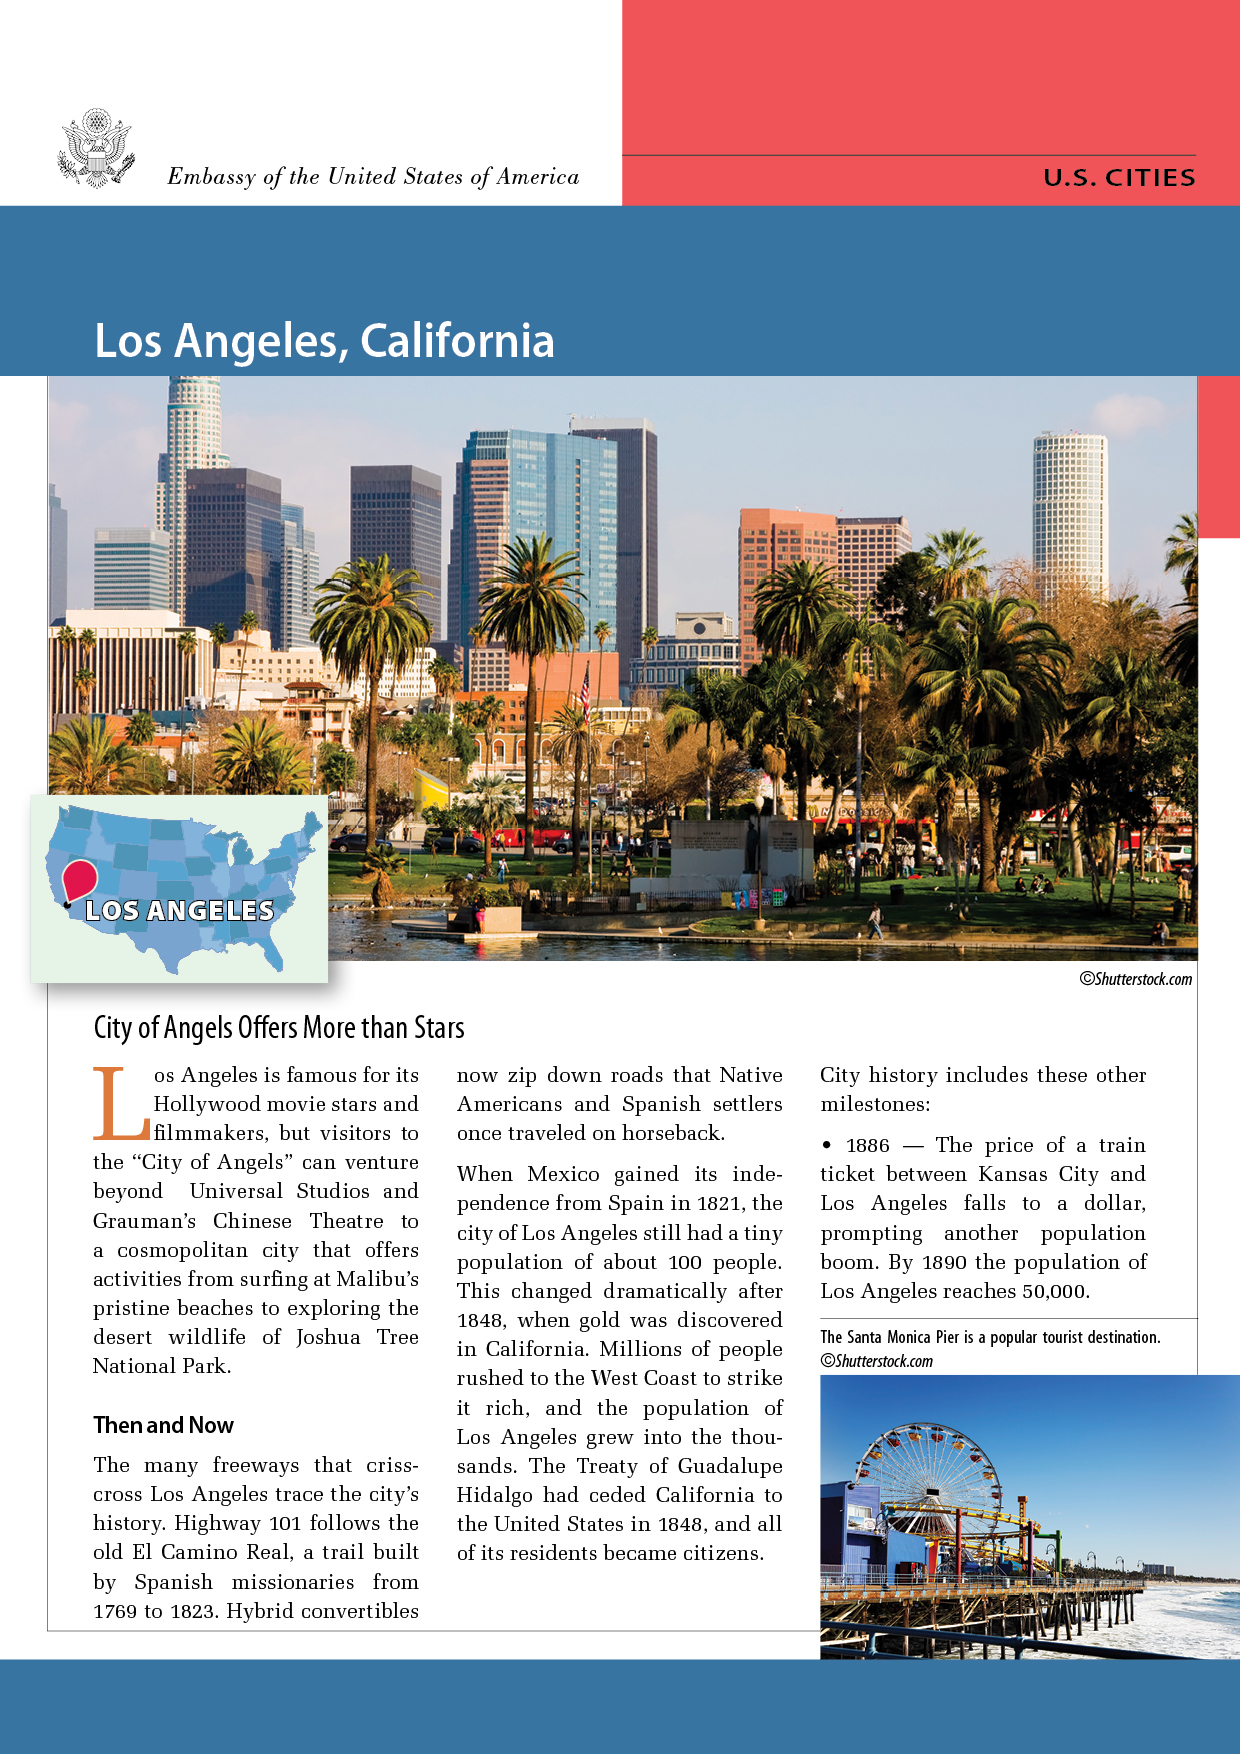 Los Angeles, California: City of Angels Offers More than Stars